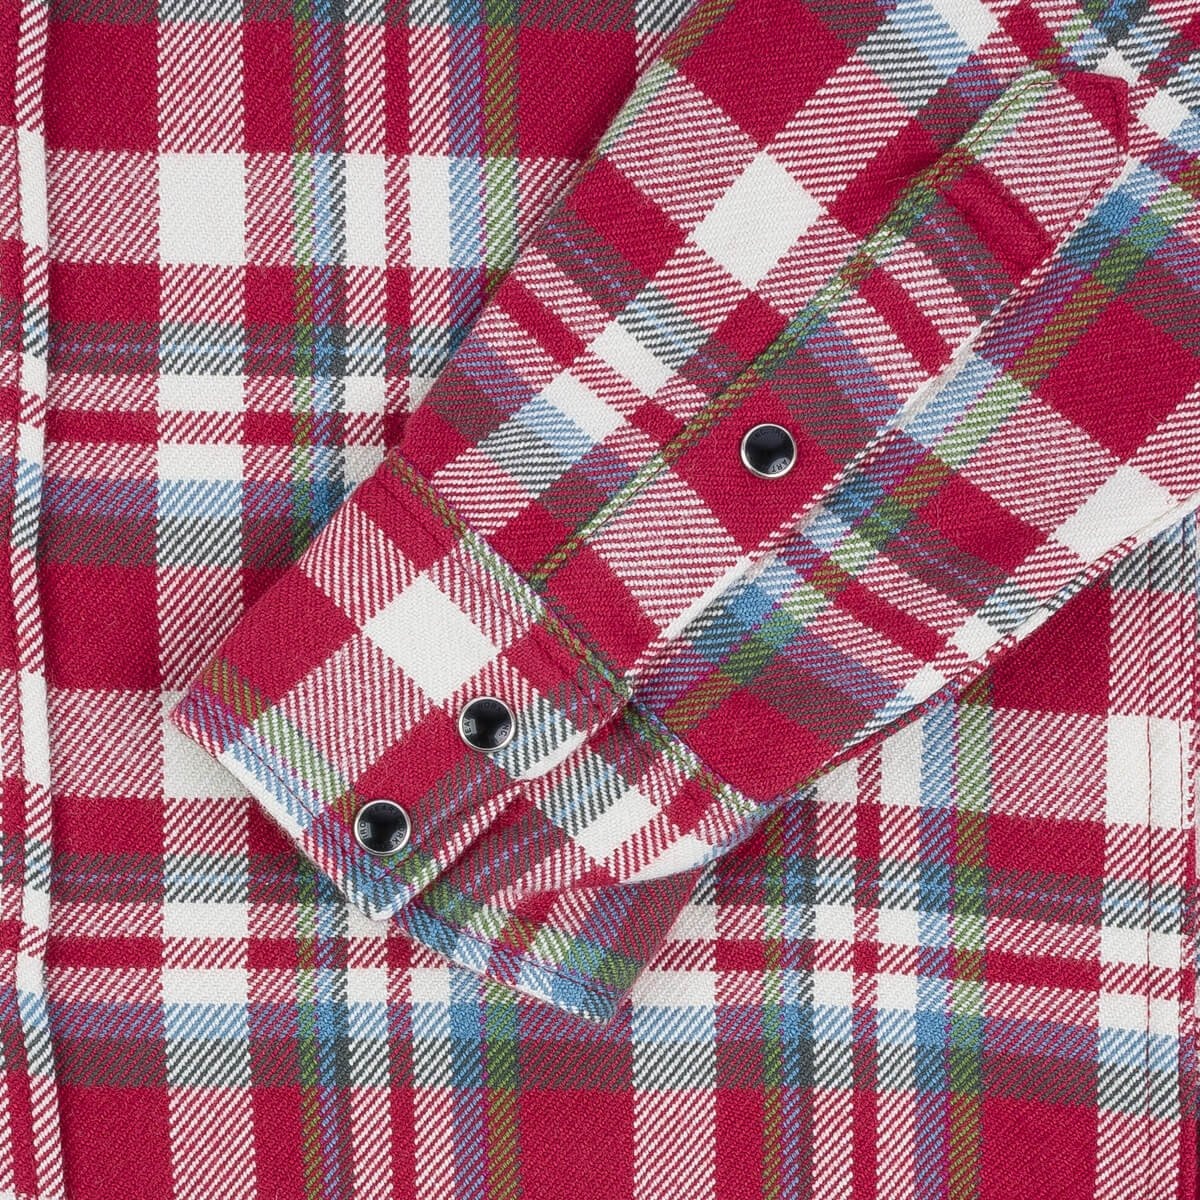 IHSH-377-RED Ultra Heavy Flannel Crazy Check Western Shirt - Red - 9